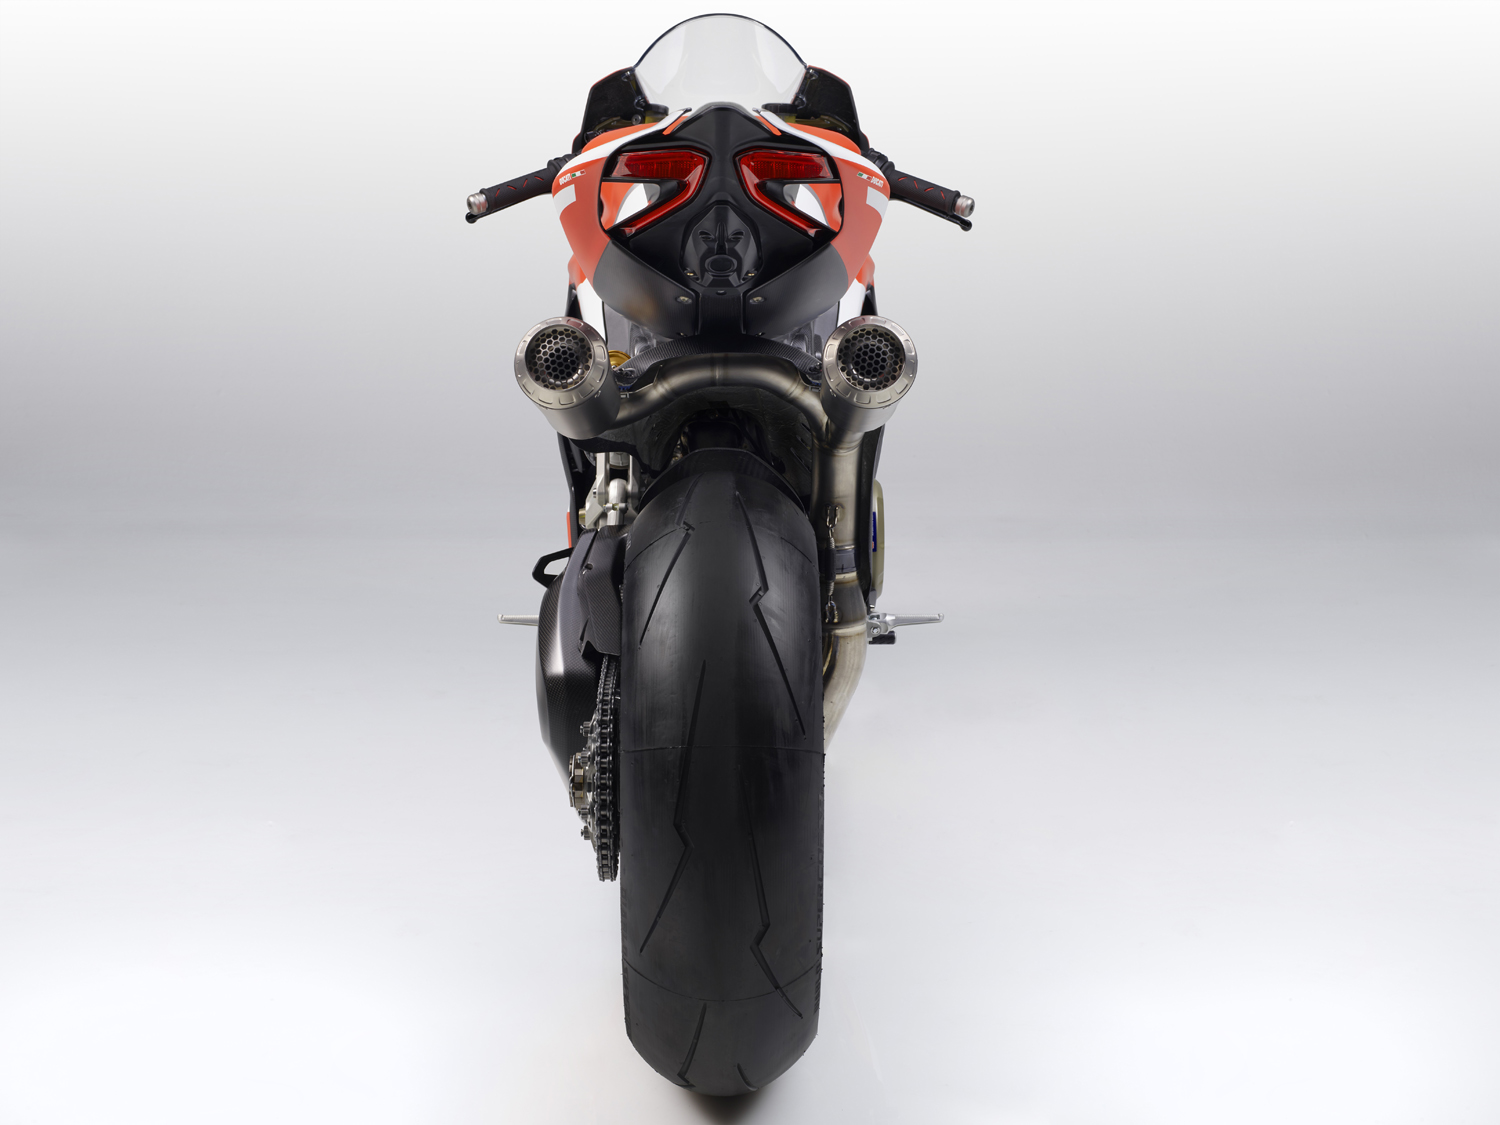 Ducati 1299 Panigale R Final Edition Motorcycles News Motorcycle Magazine